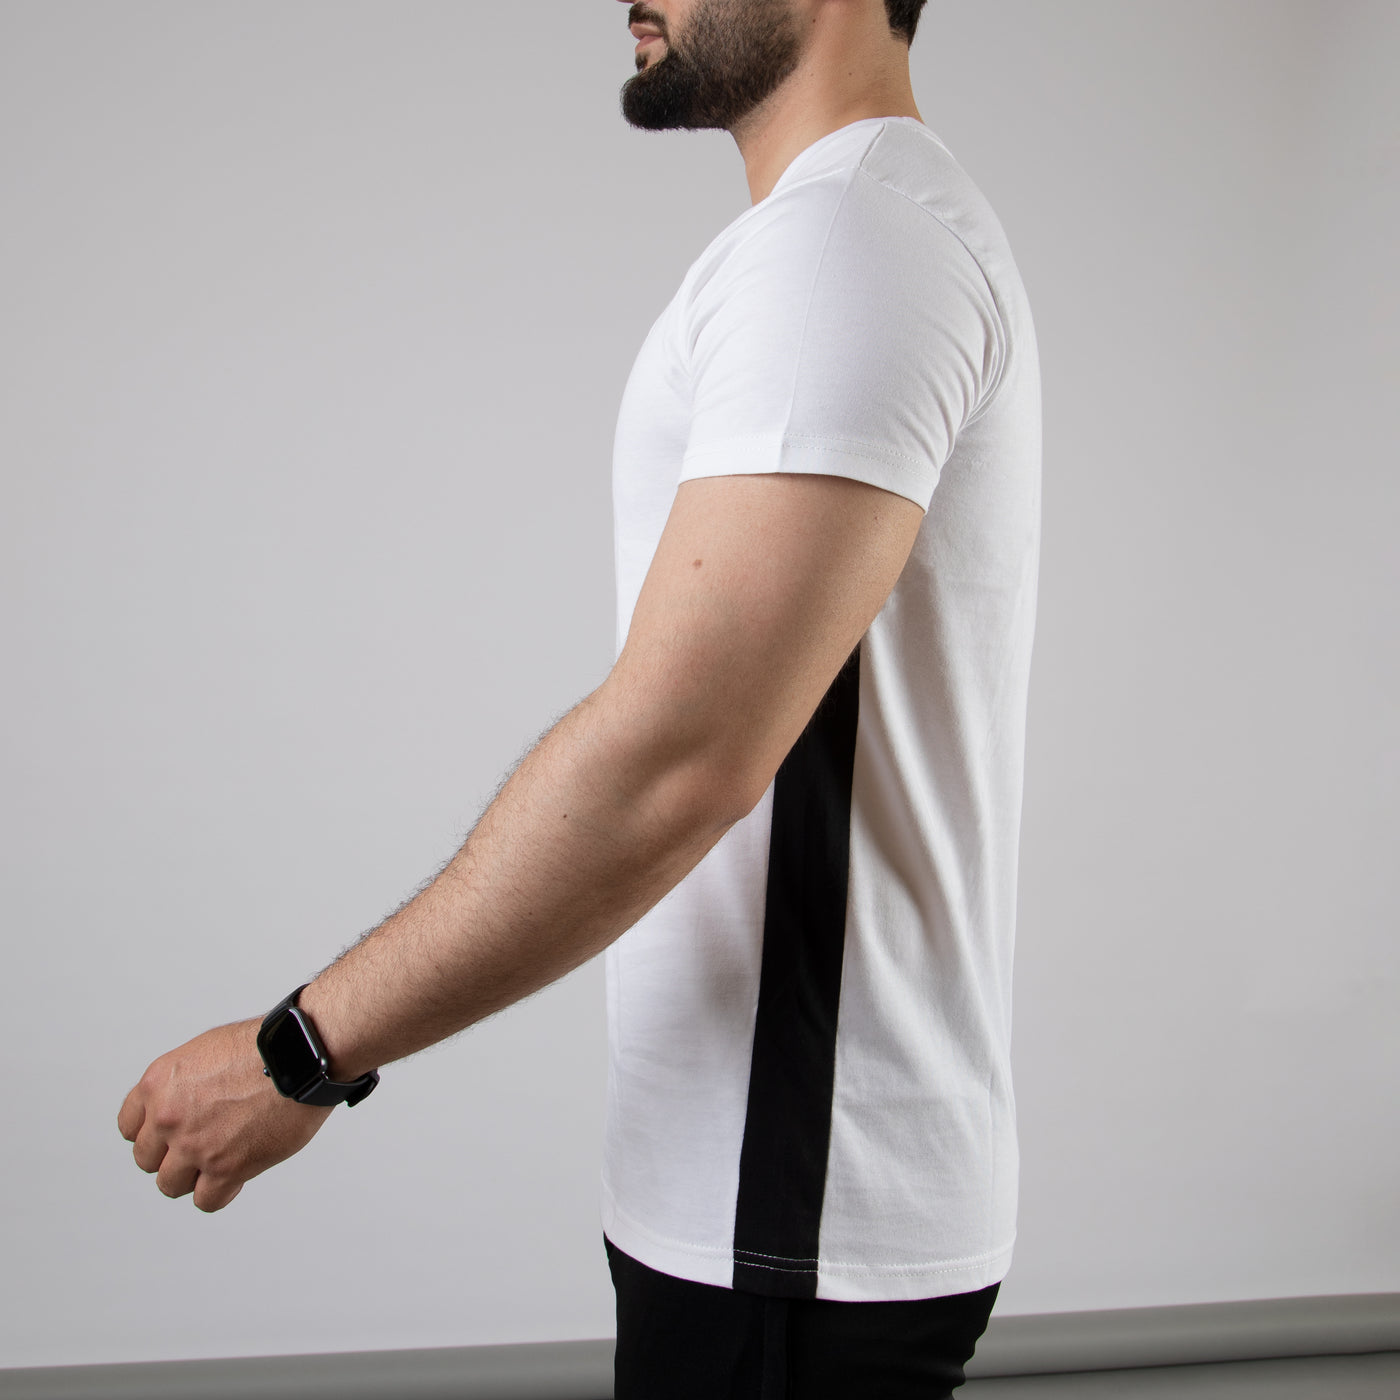 White T-Shirt With Black Side Panels